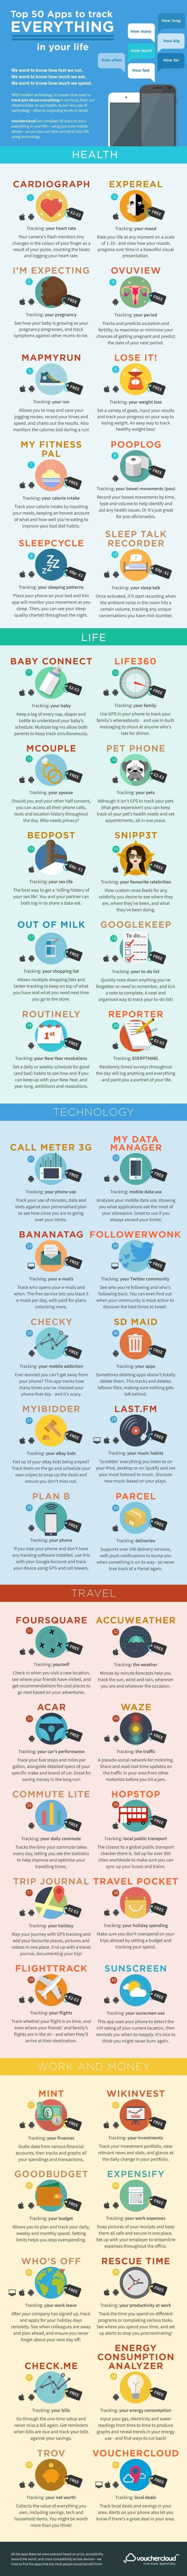 Best 50 Apps to Track Everything Infographic